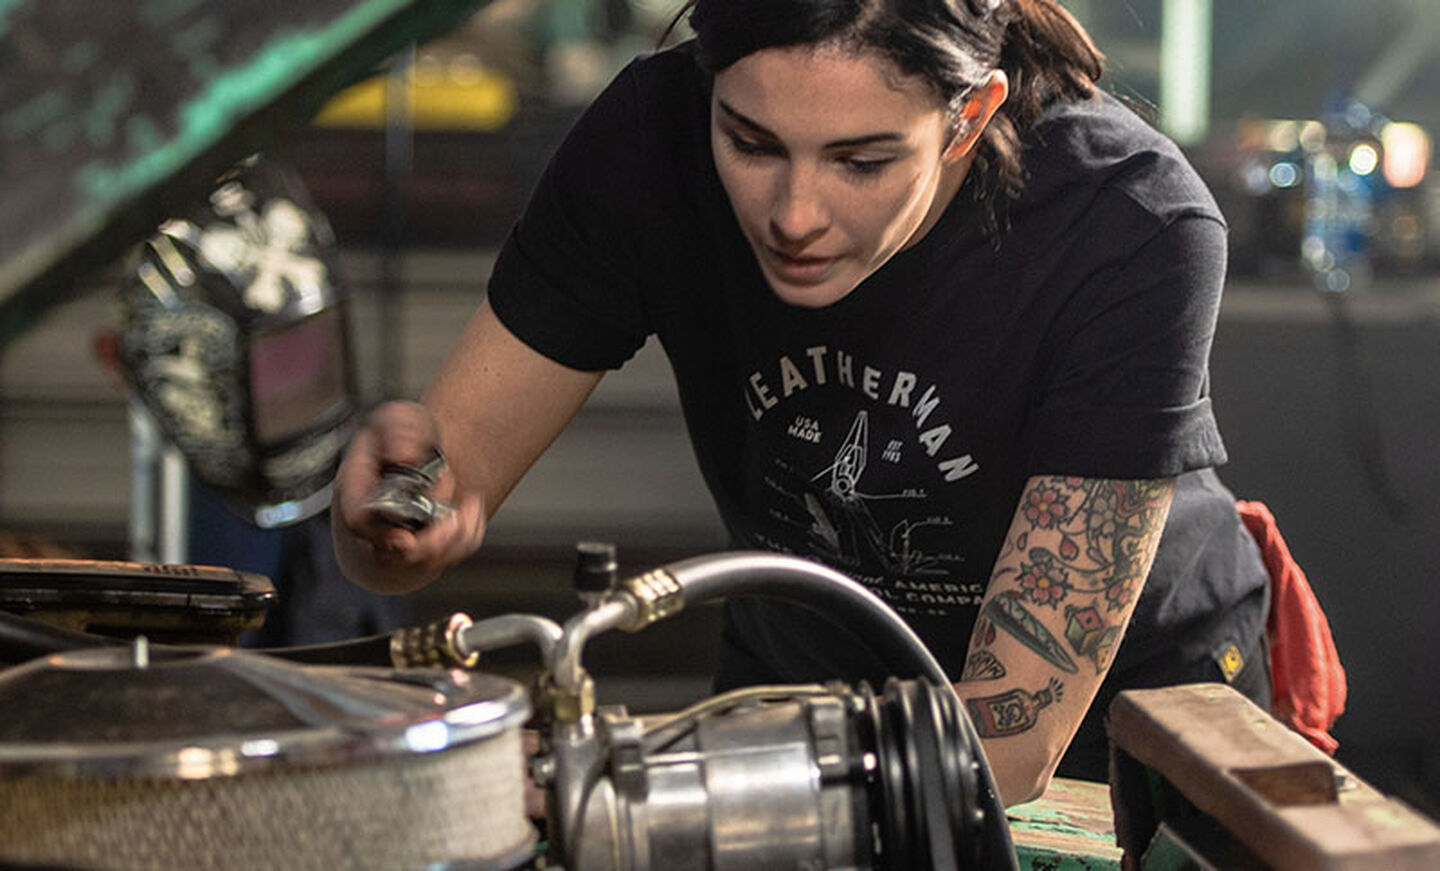 Woman mechanic wears black Leatherman PST Heritage T-Shirt while working under the hood of a vehicle.